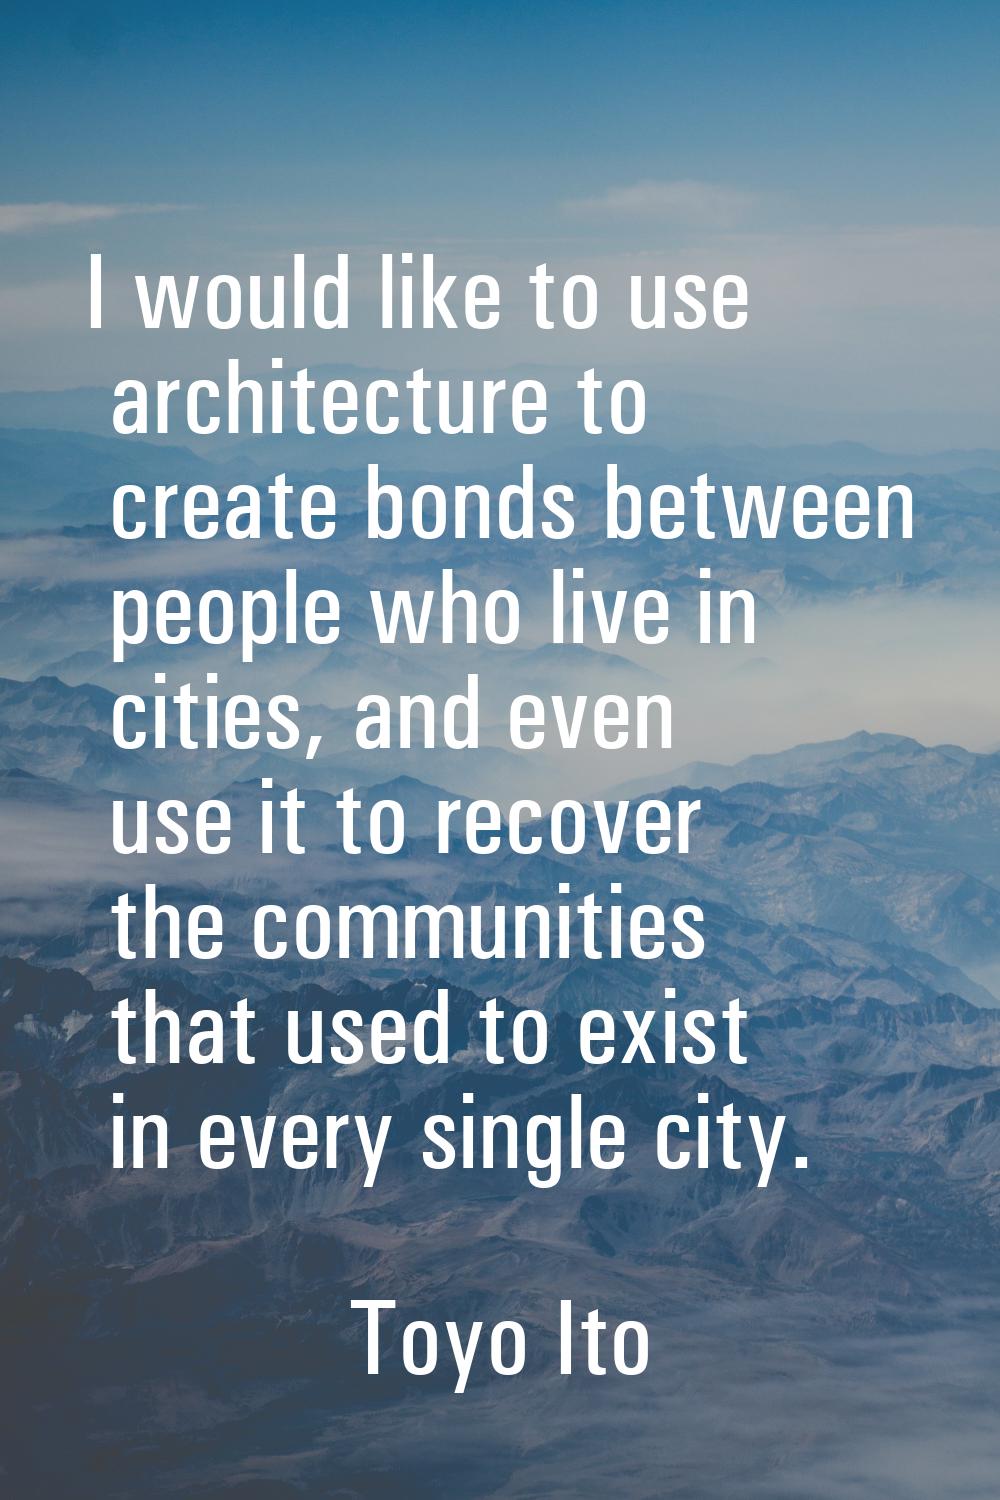 I would like to use architecture to create bonds between people who live in cities, and even use it